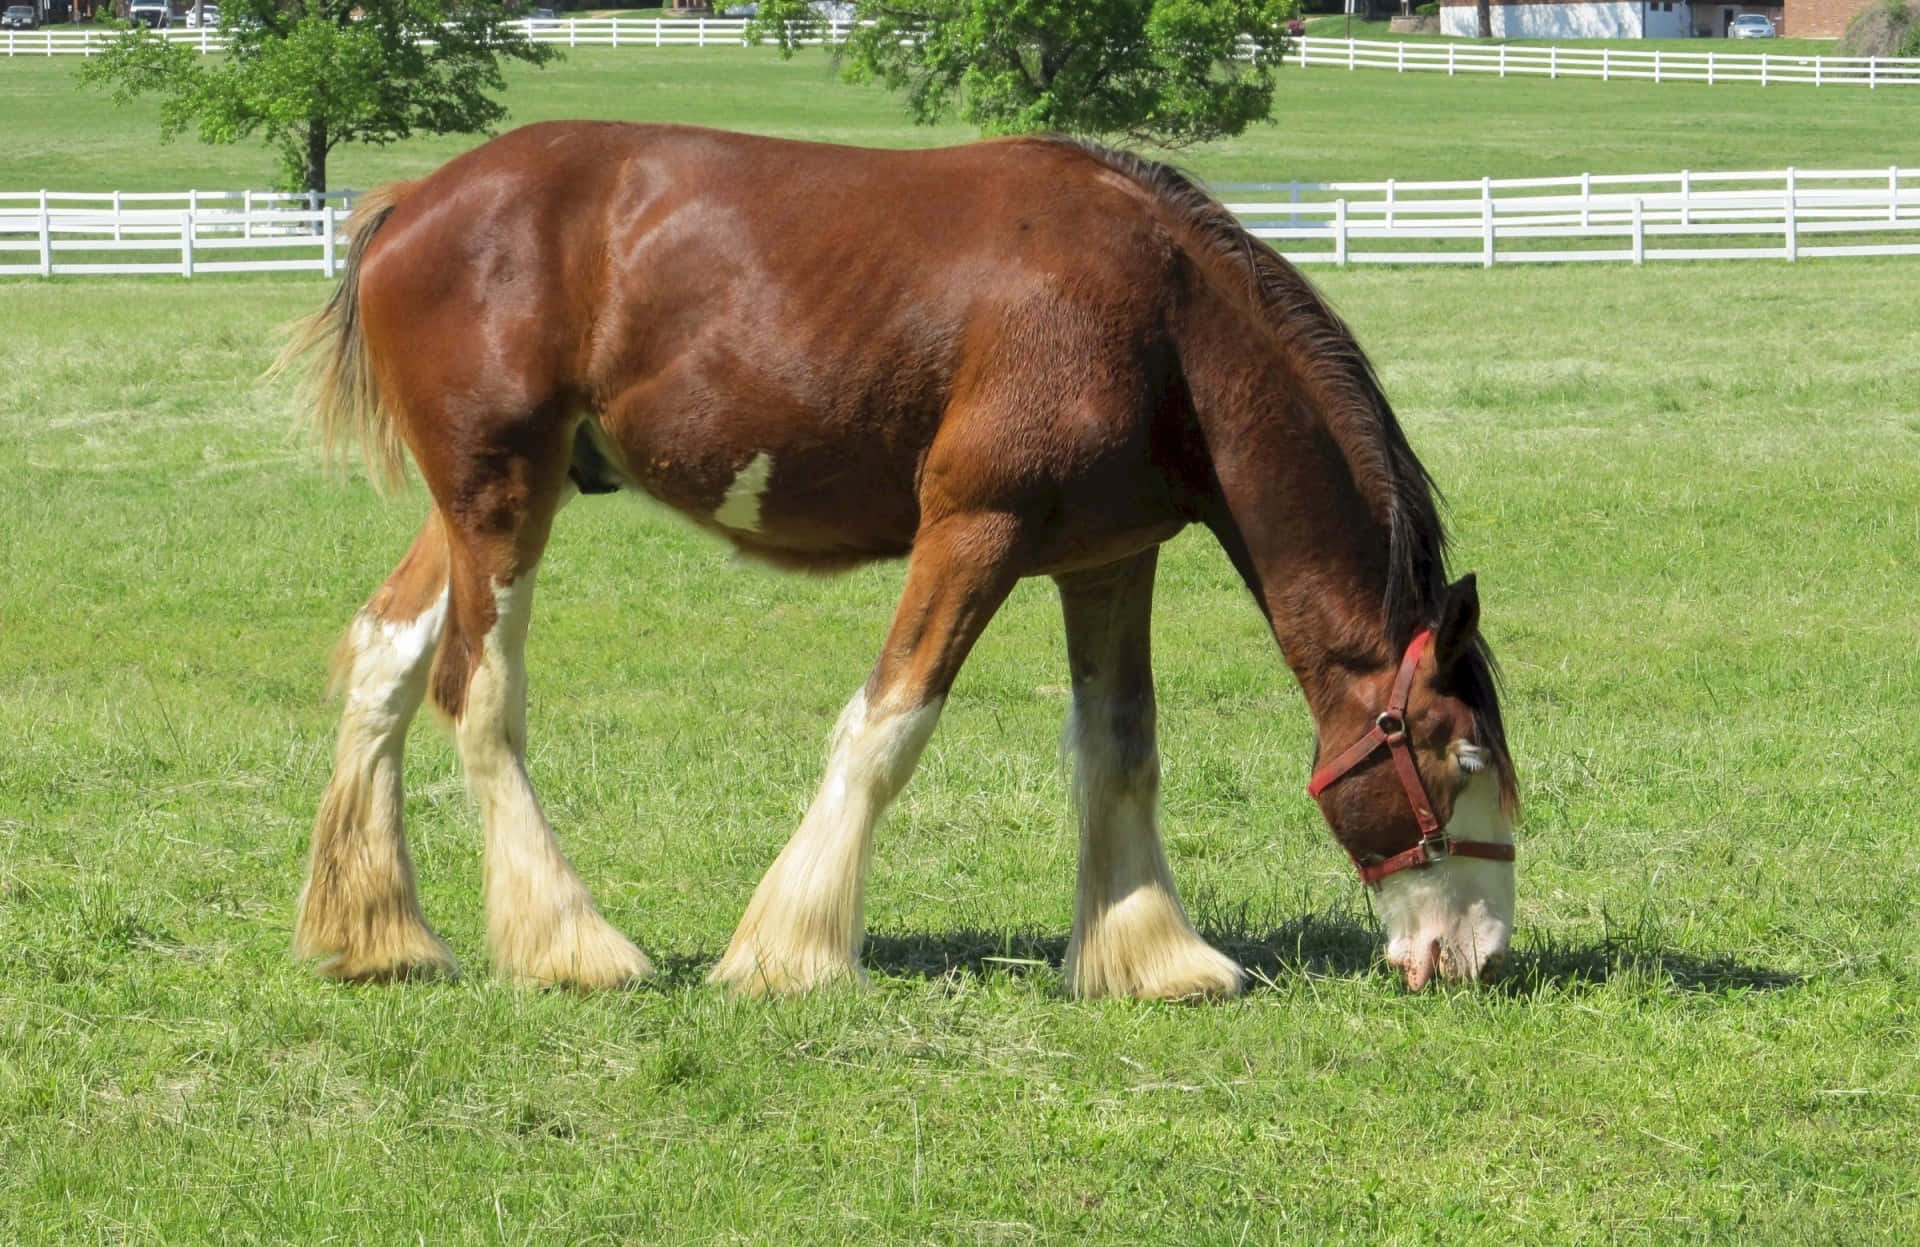 Standing majestic, this stunning Clydesdale horse looks ready to take on the world.